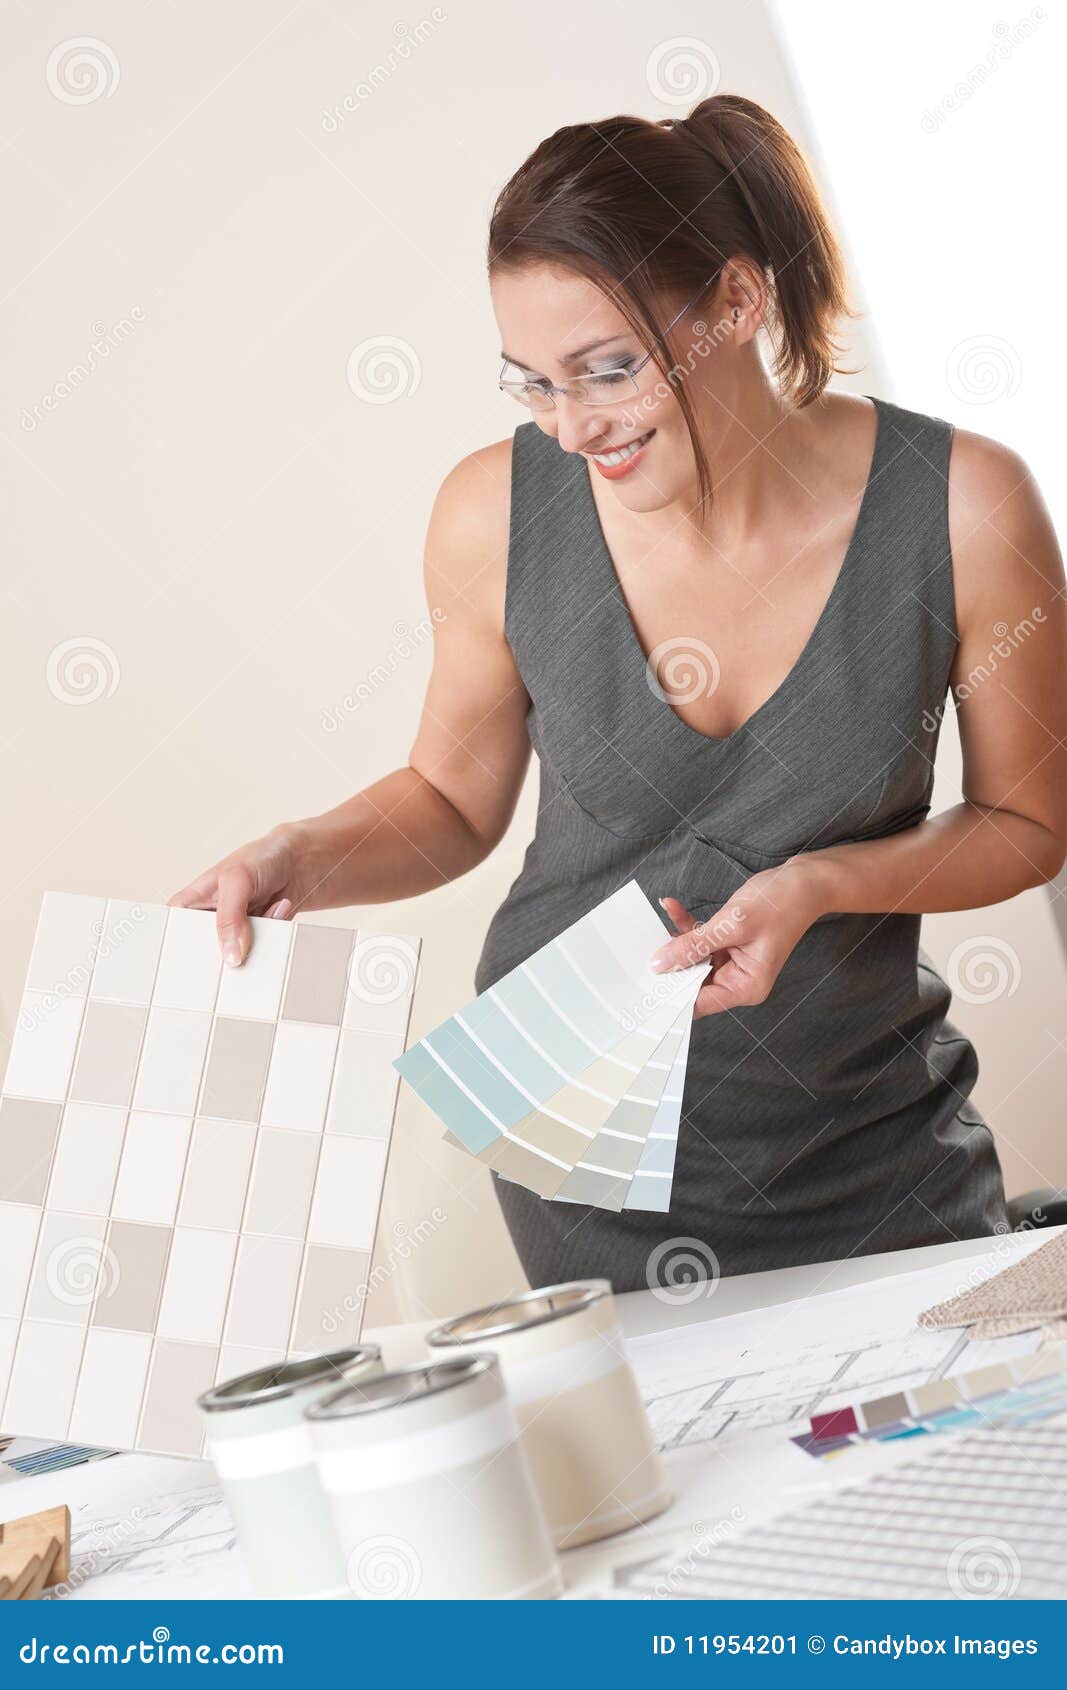 Female Interior Designer Working With Color Swatch Stock Image Image